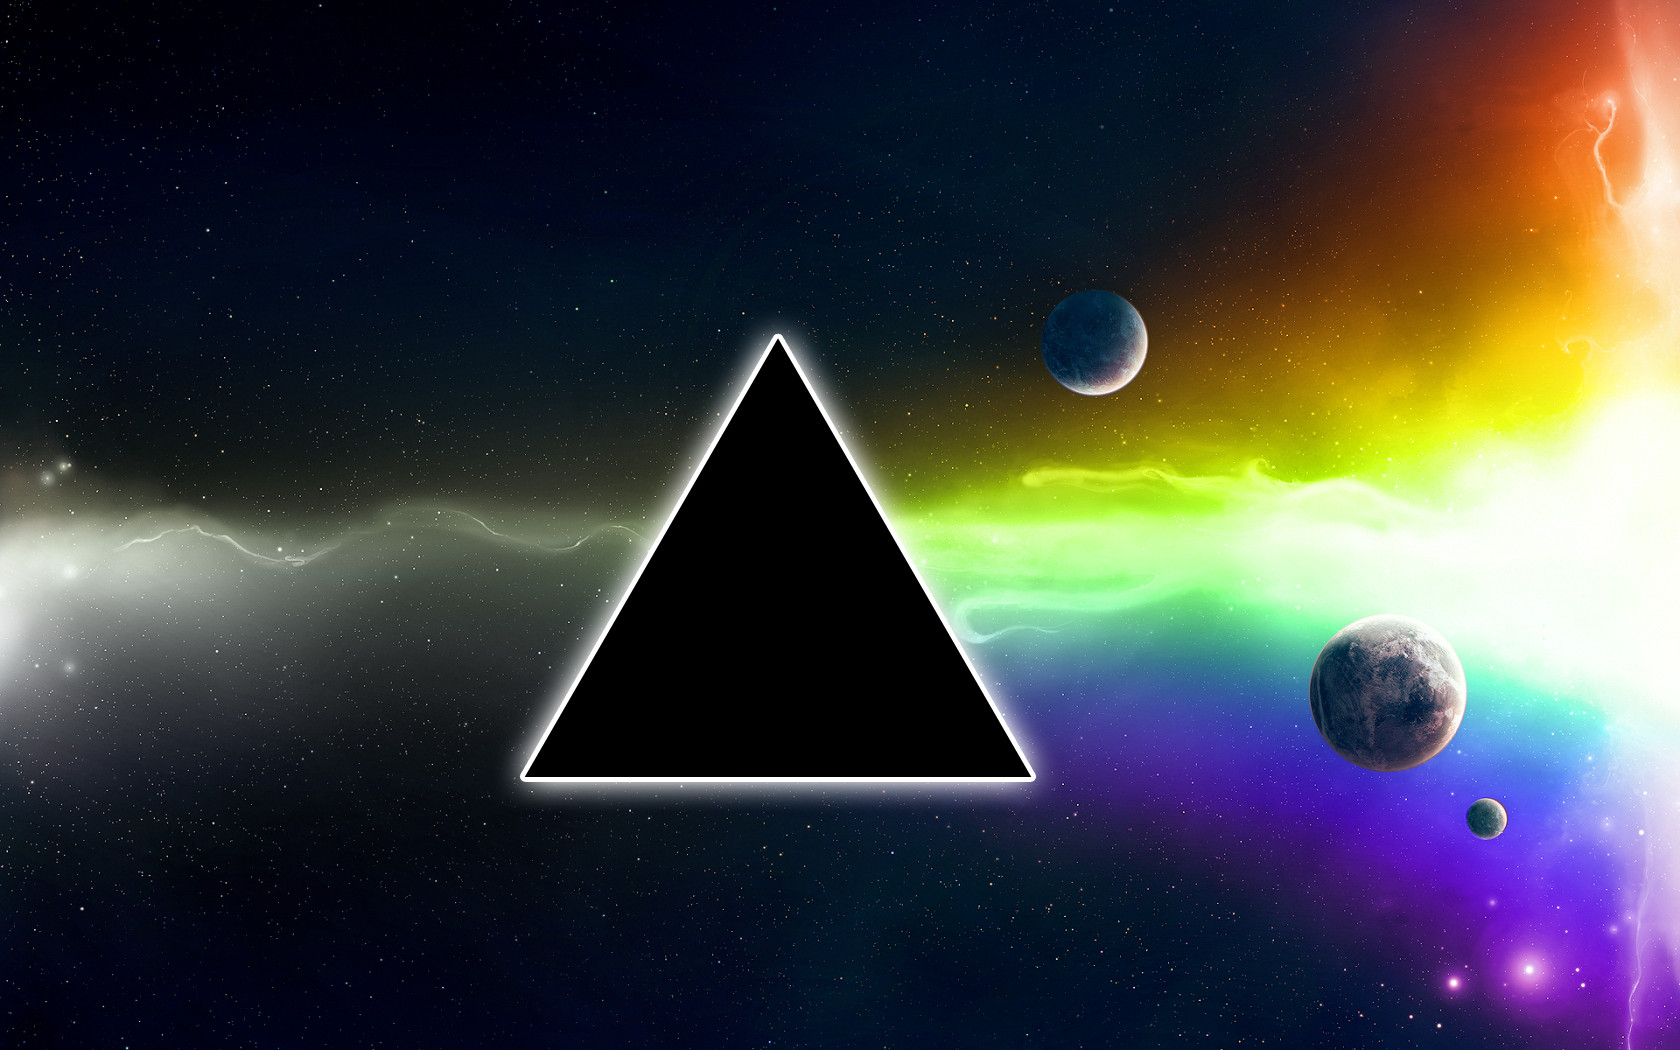 General 1680x1050 prism Pink Floyd The Dark Side of the Moon triangle color wheel space planet stars glowing music space art